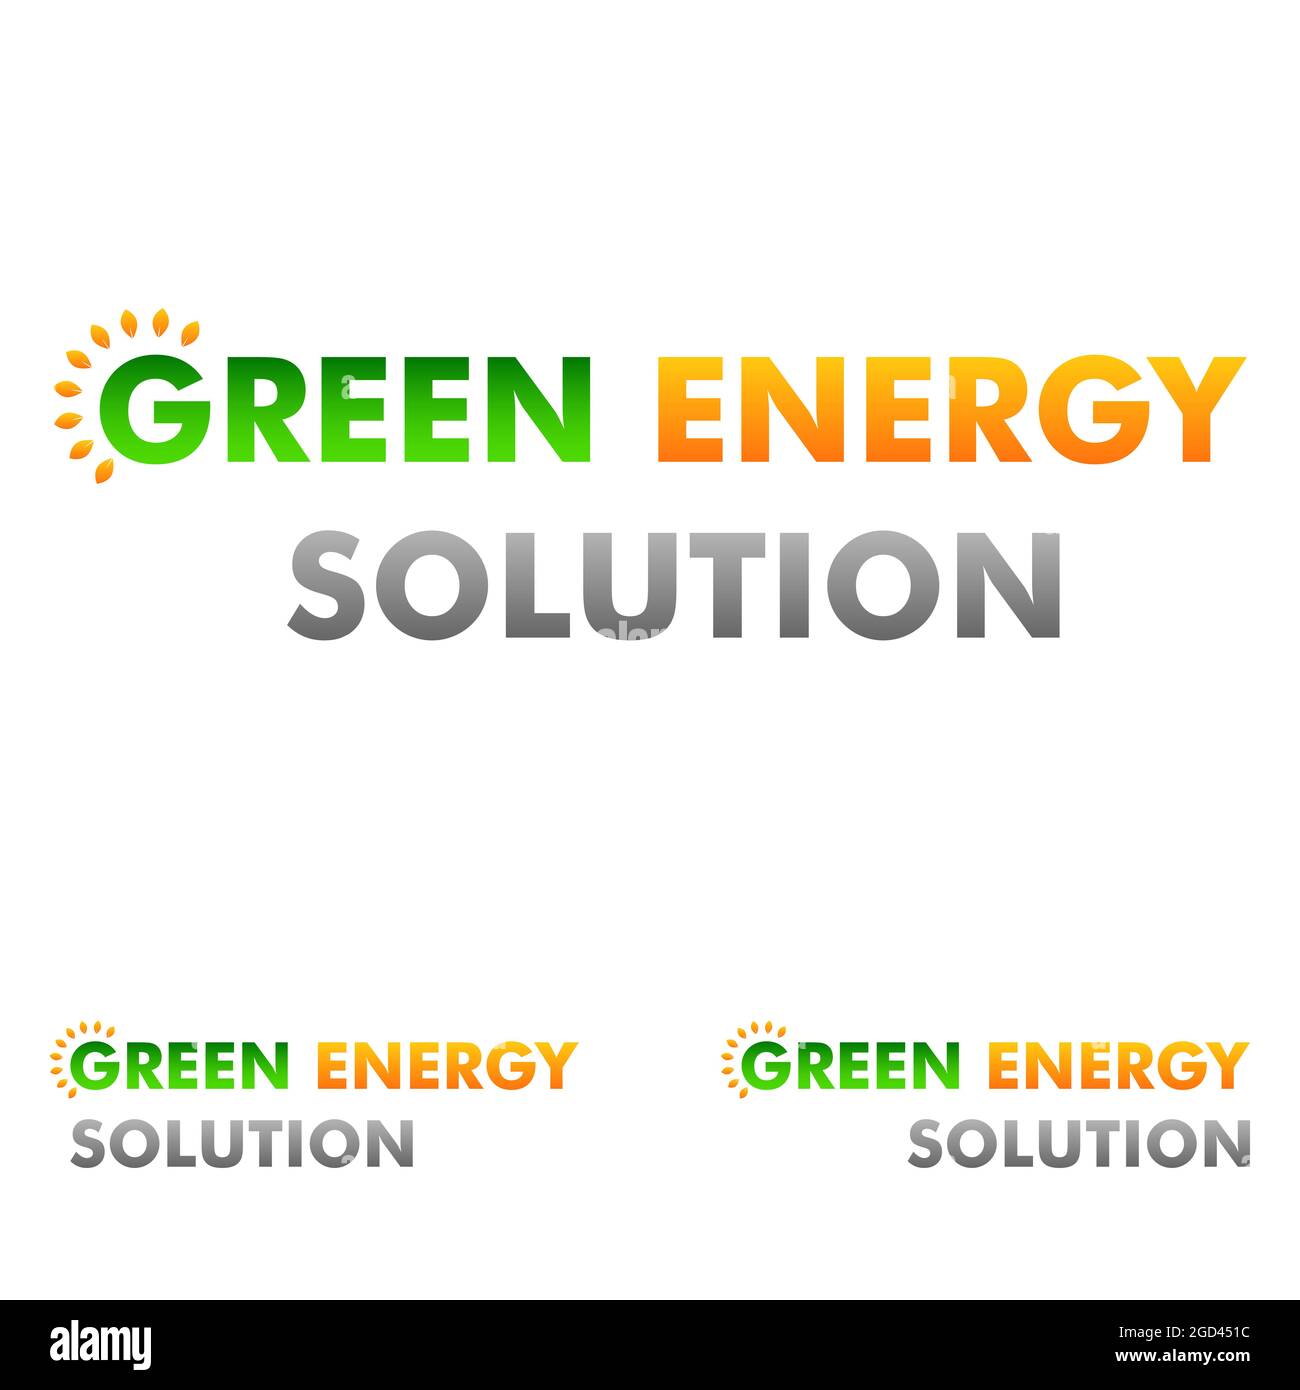 set off green energy solution typography. renewable and clean energy illustration design concept Stock Photo